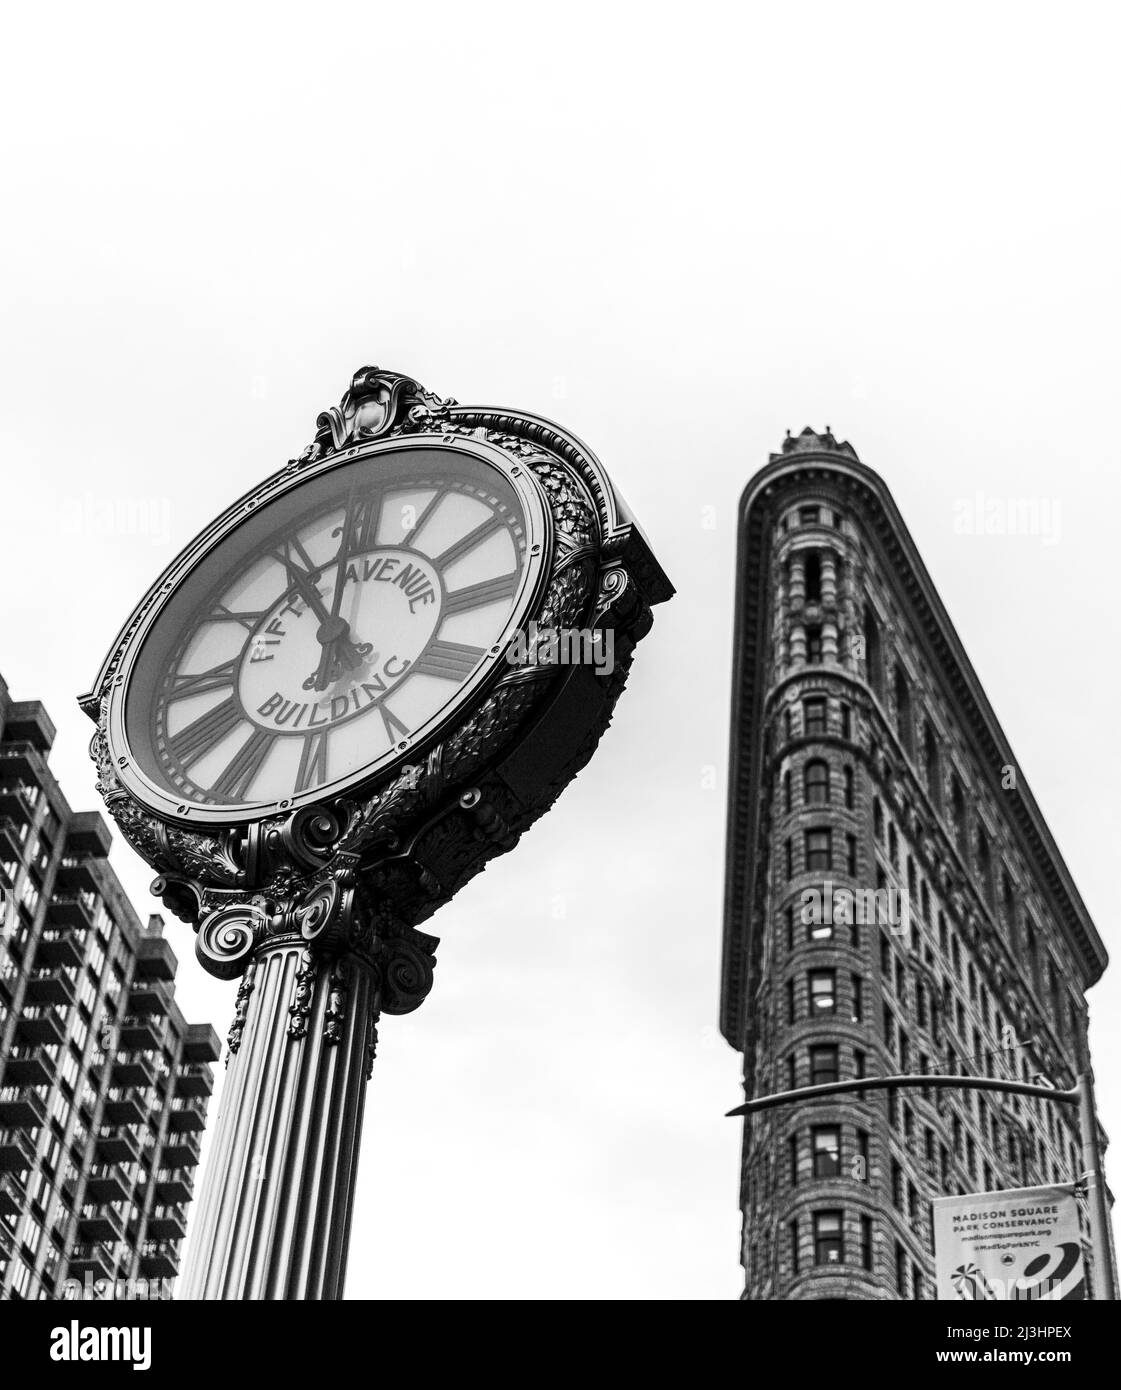 23 Street, New York City, NY, USA, Historic Flatiron or Fuller Building, a 22 Story triangular shaped steel framed Landmark, built in 1902 and considered as one of the first skyscrapers ever built and one of New York's famous sidewalk clocks Stock Photo